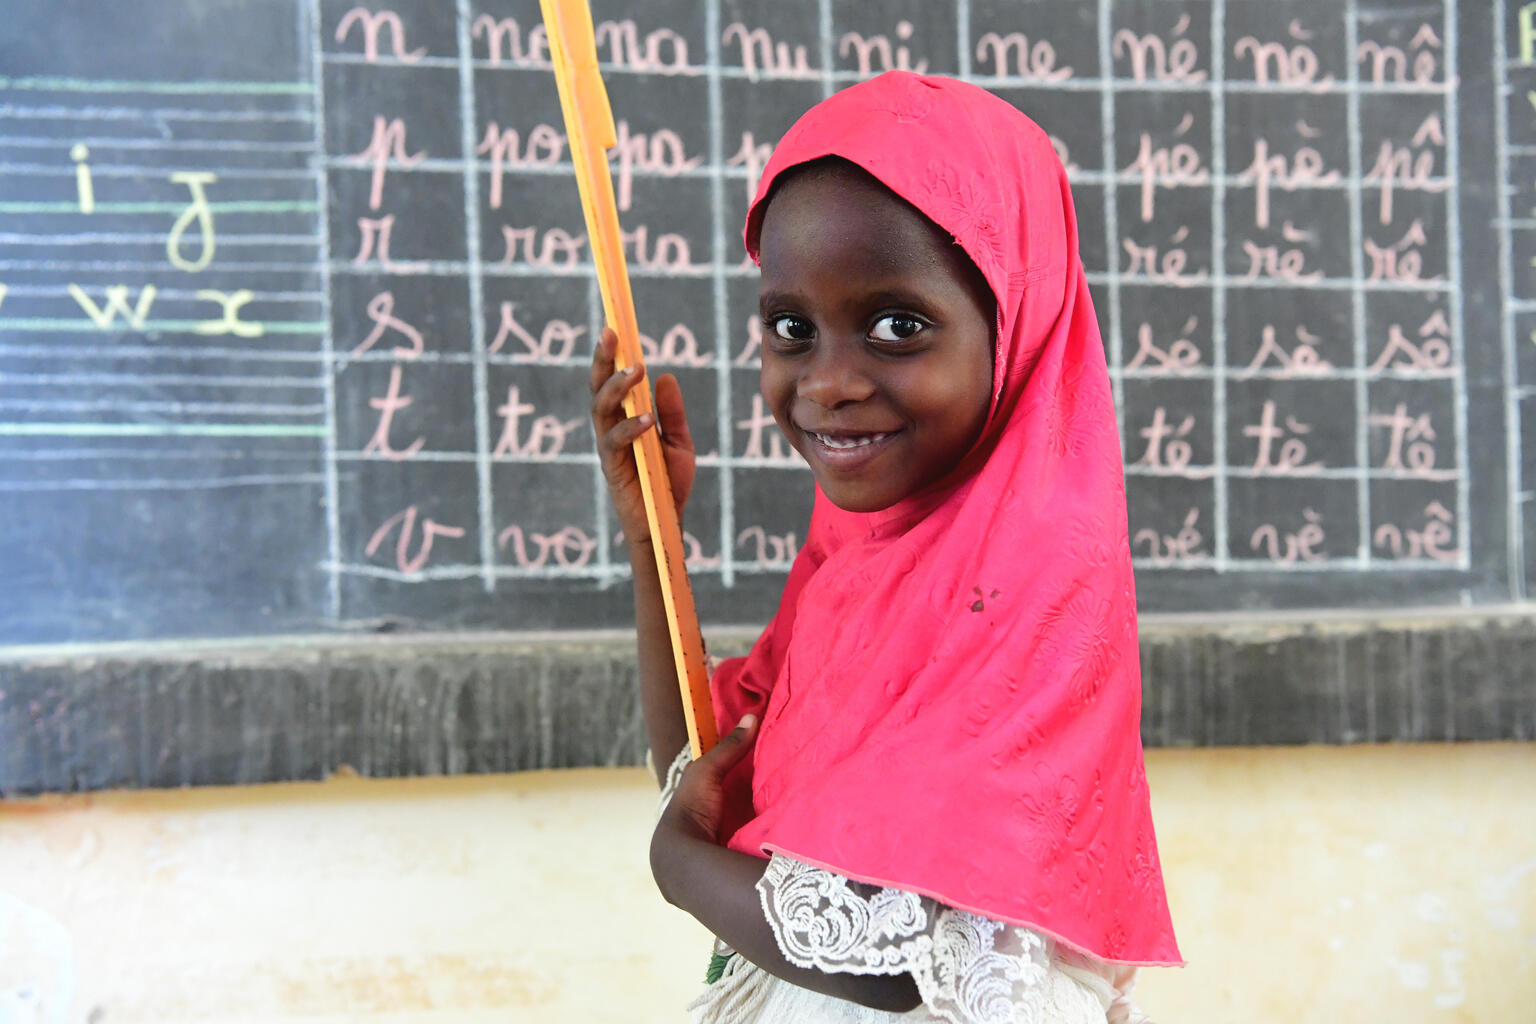 A girl in West Africa smiles at school.